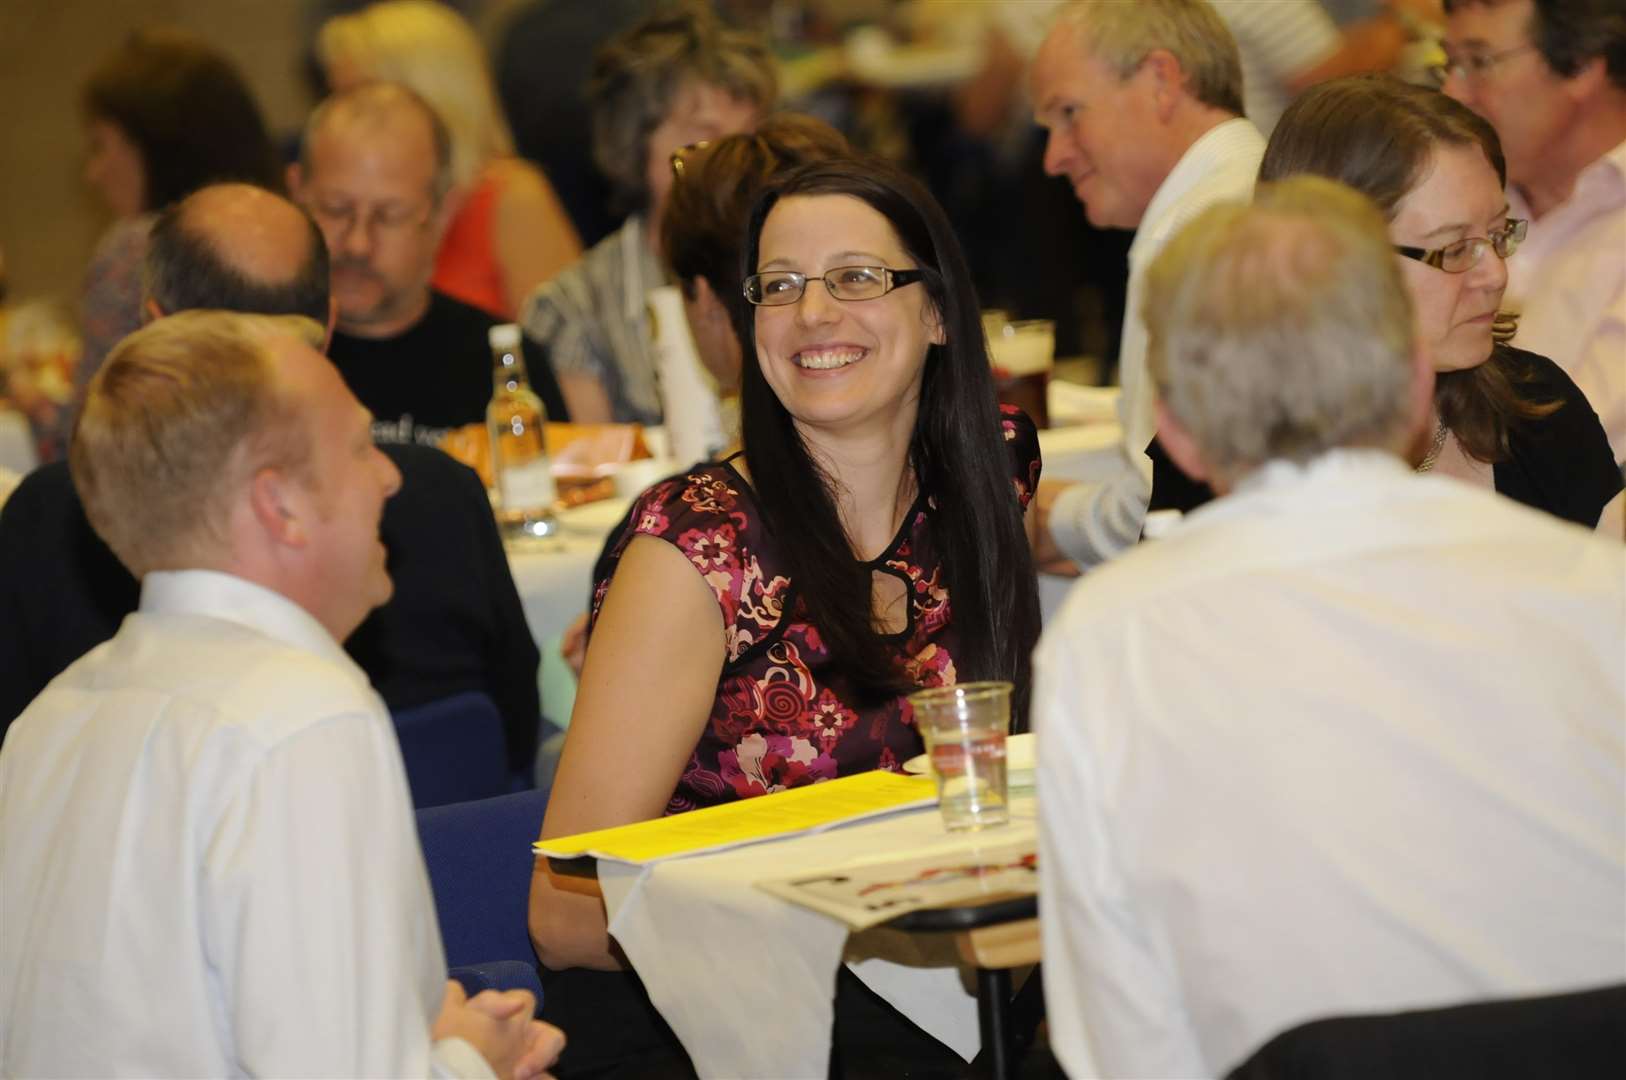 Fun for all at the KM Big Charity Quiz. (1666346)